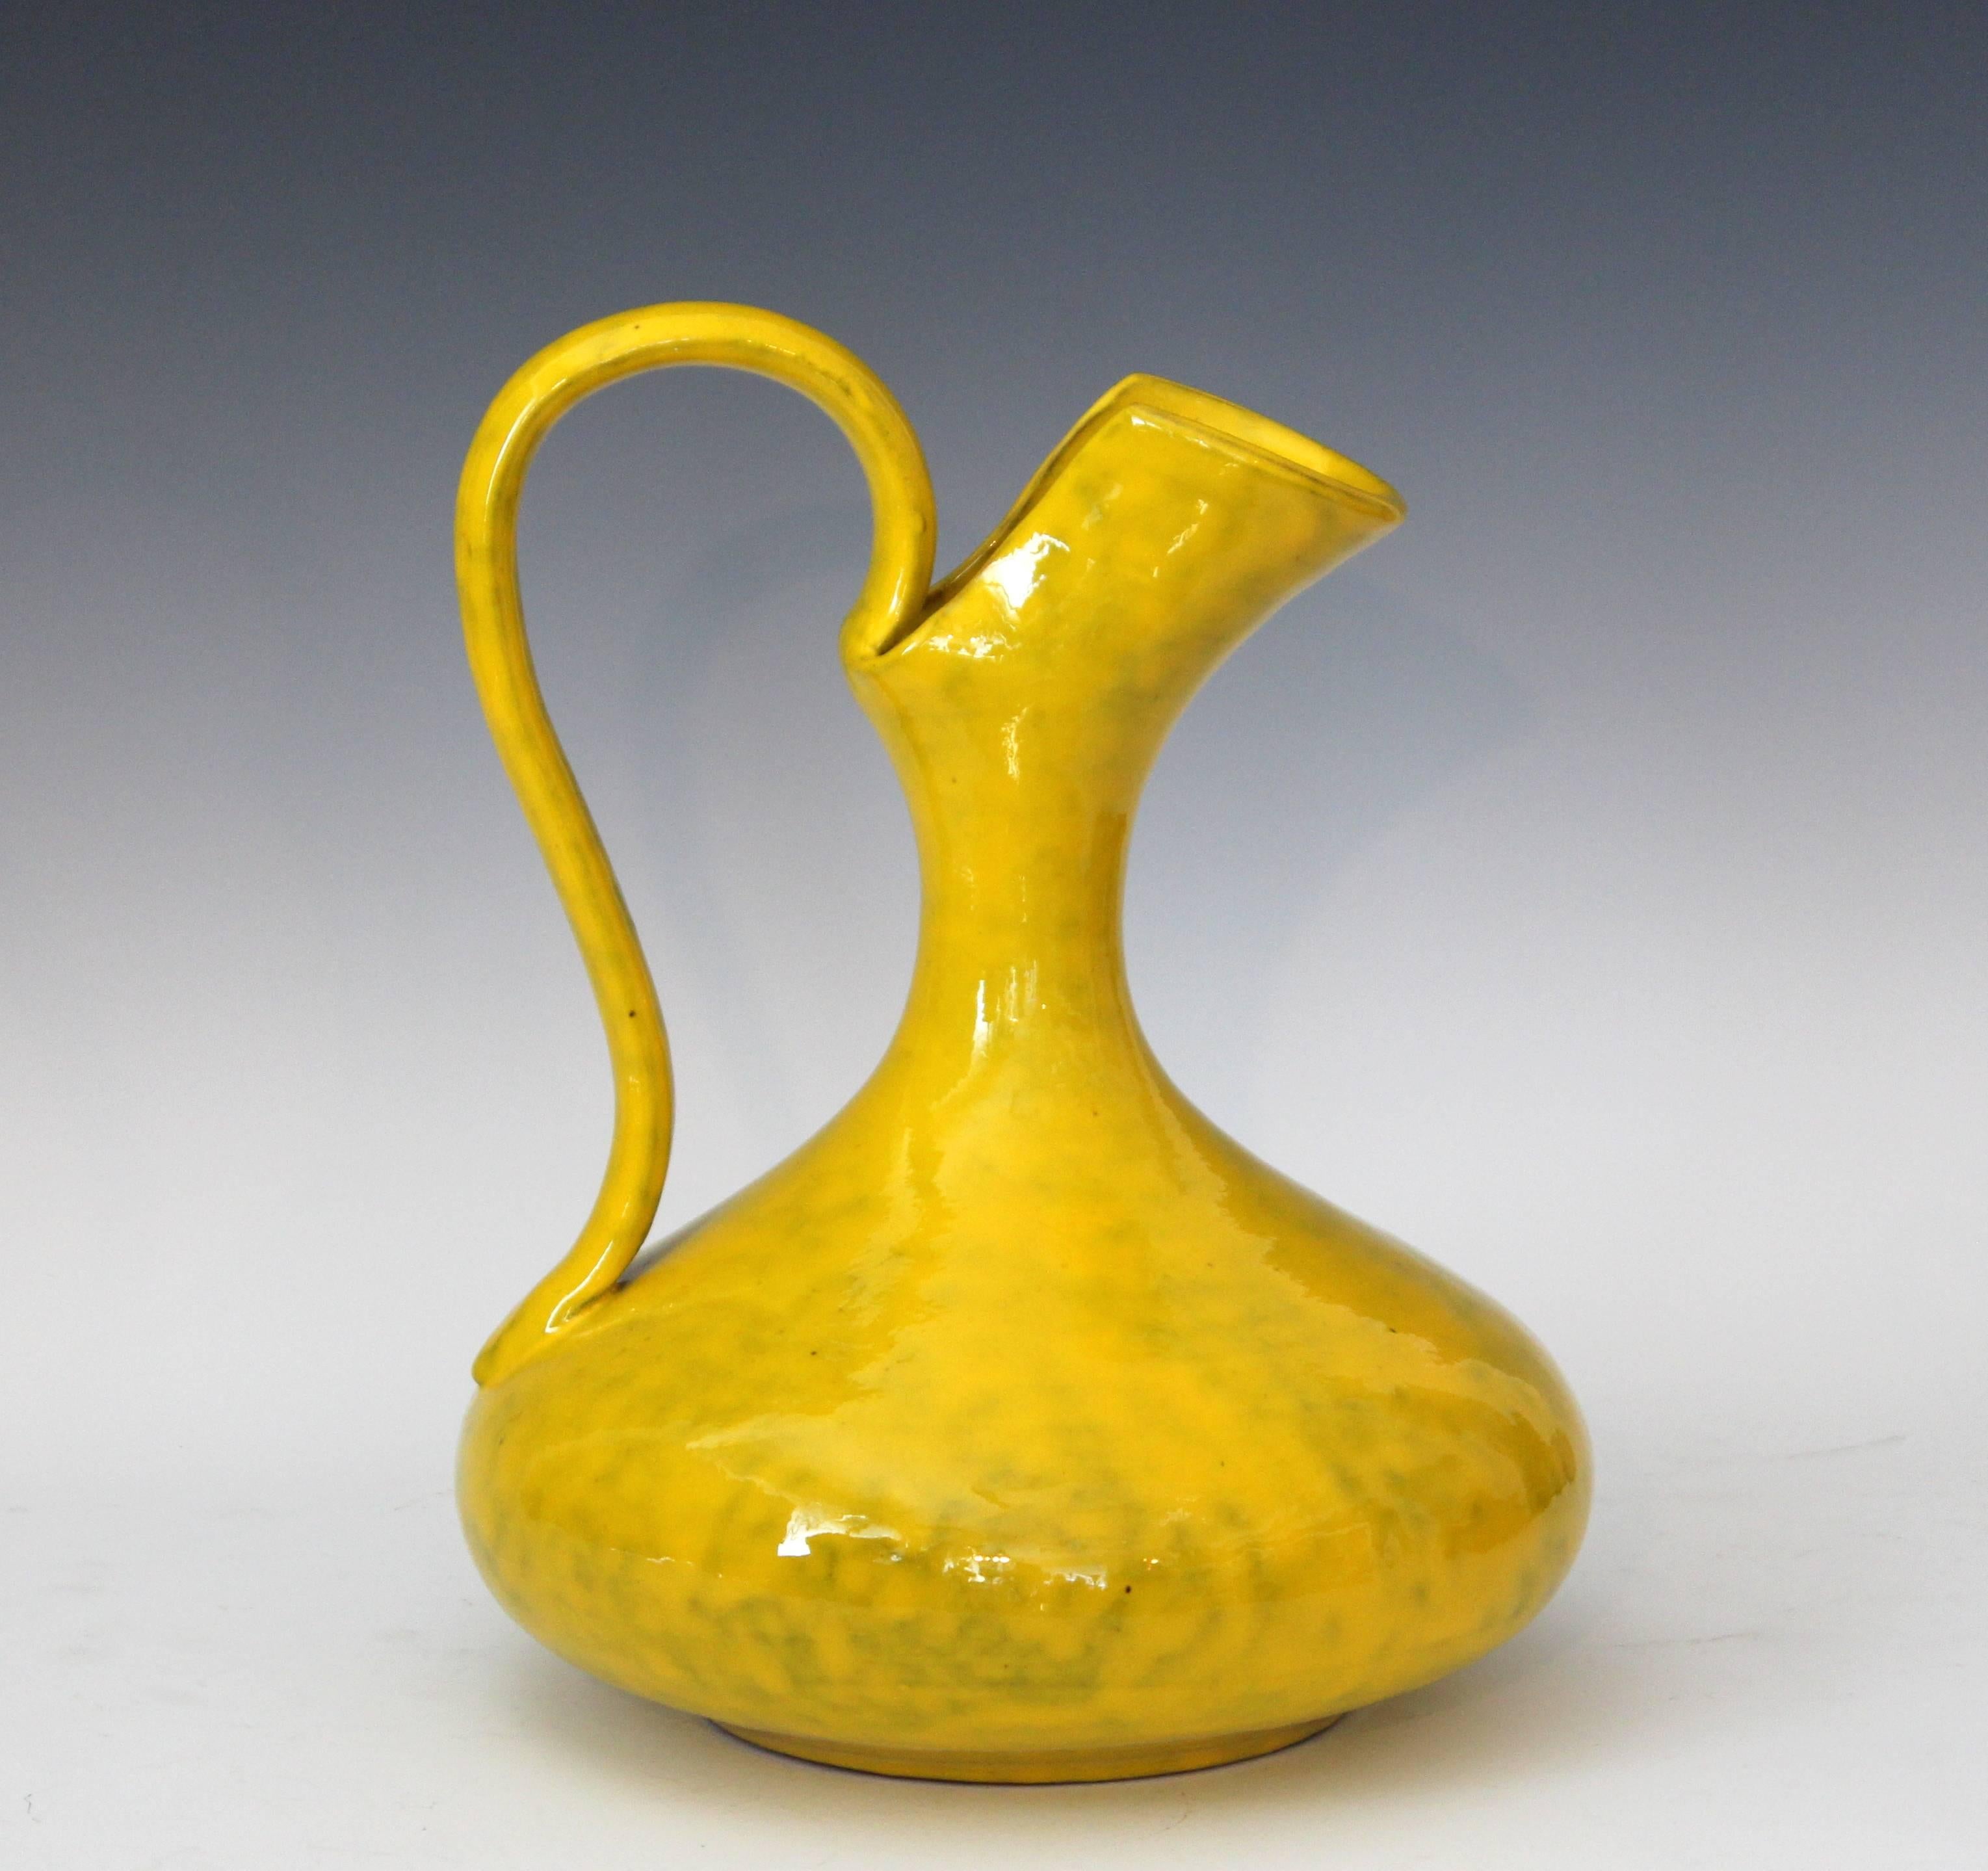 1960s hand-turned Italian pottery pitcher vase in classical form with electric mottled yellow glaze for Rosenthal-Netter. Attributed to Italica Ars. With original Rosenthal-Netter label. Measures: 13